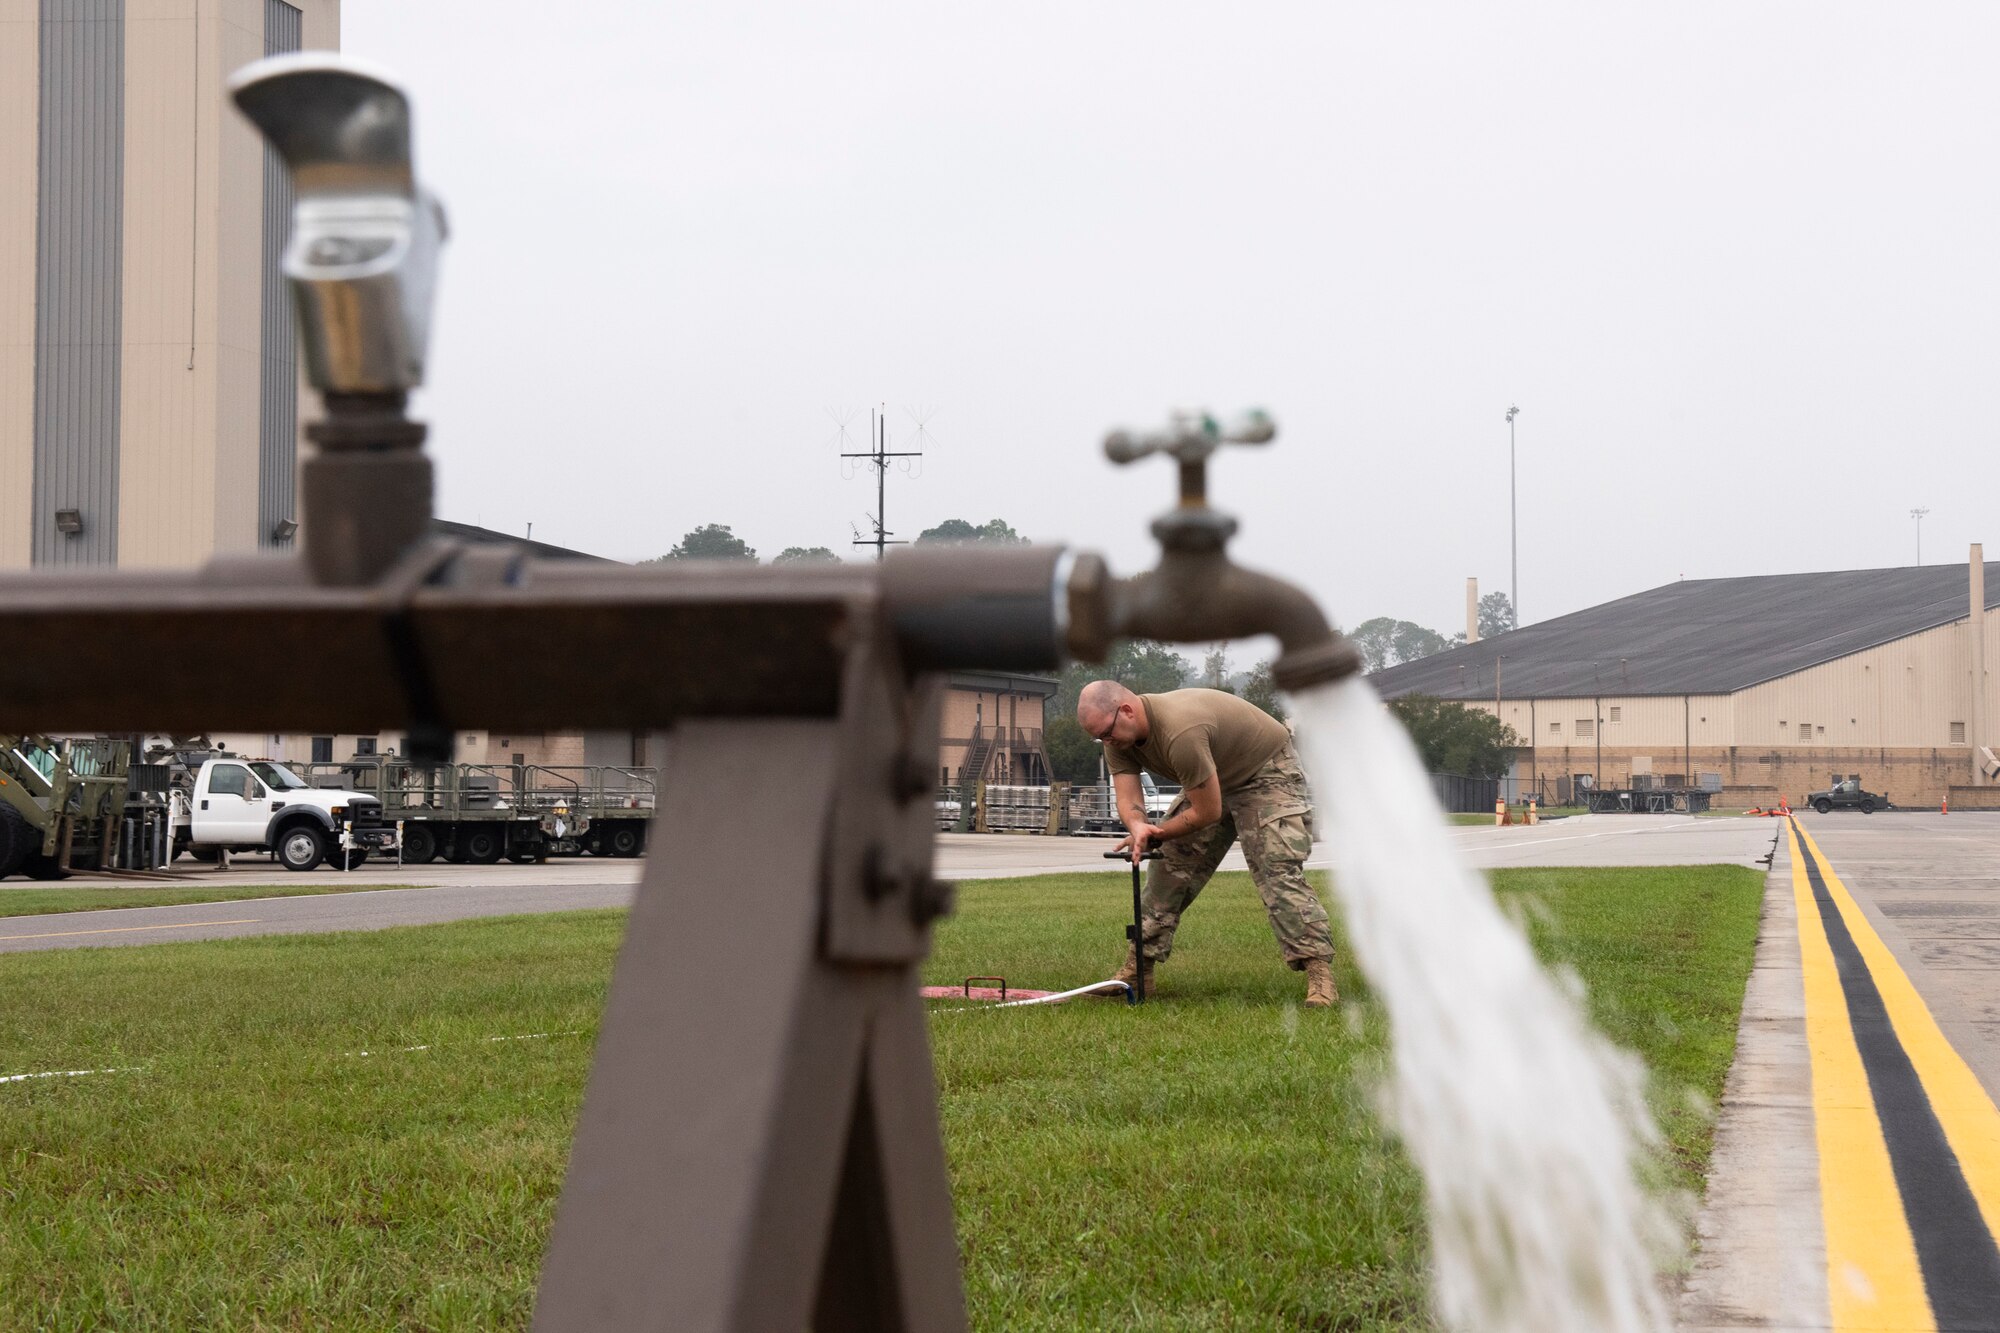 Staff Sgt. Douglas Shaw, 23d Civil Engineer Squadron (CES) water and fuel systems maintenance journeyman, tests water flow from a water pump Oct. 29, 2019, at Moody Air Force Base, Ga. The 23d CES installed water fountains around the flightline in preparation for the air show. This will give air show attendees locations for clean water and help with dehydration related injuries. (U.S. Air Force photo by Airman Elijah Dority)